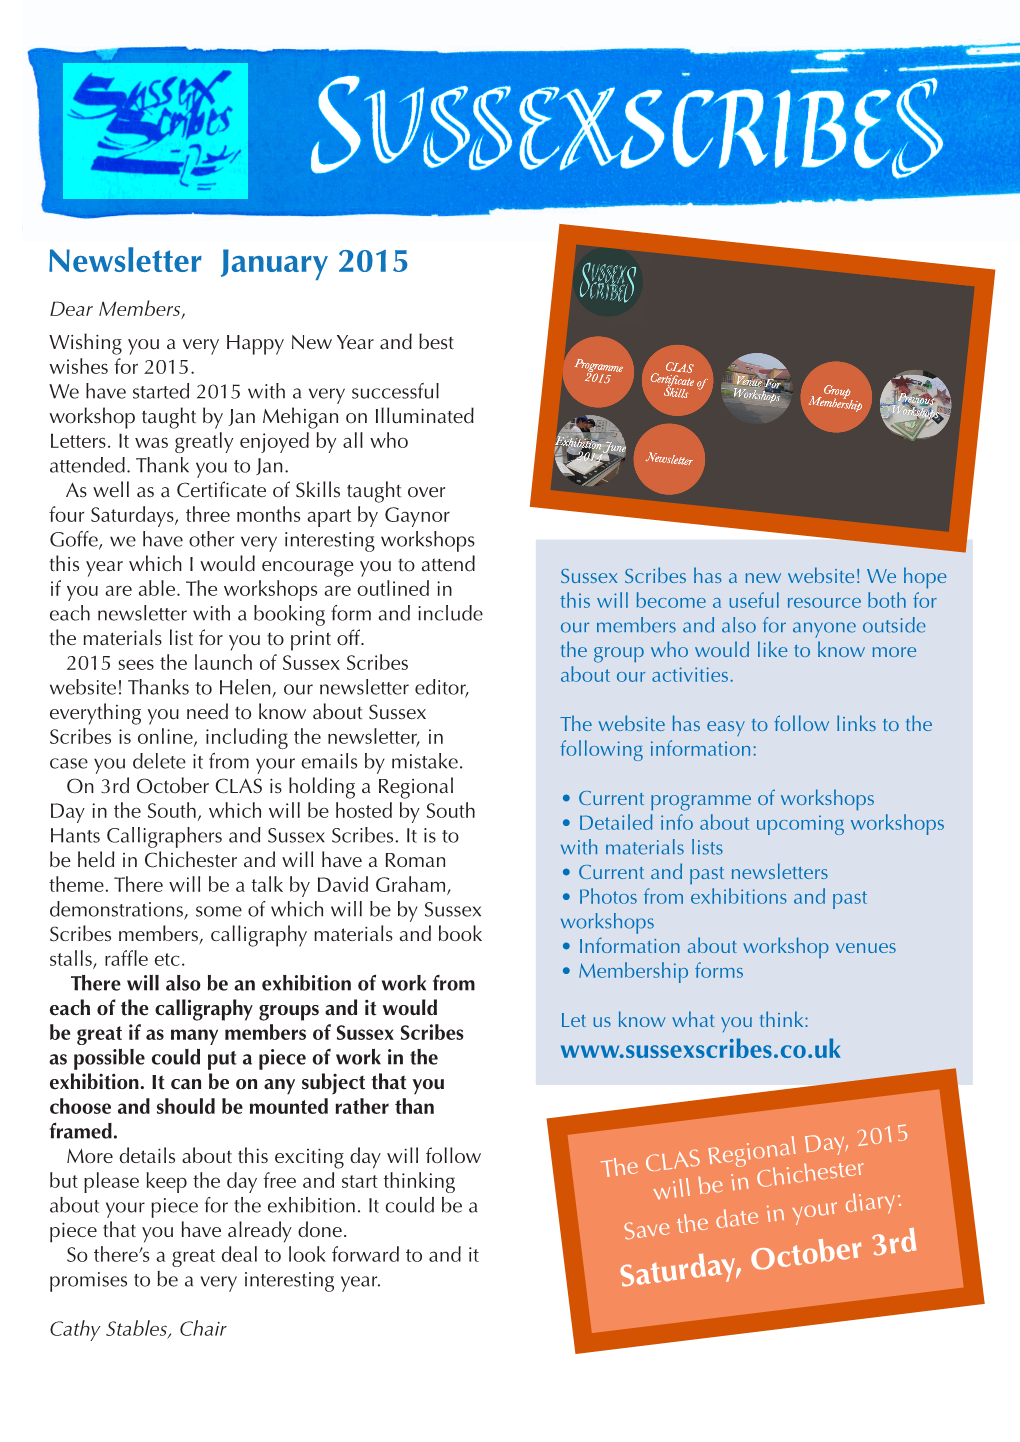 Newsletter January 2015 Dear Members, Wishing You a Very Happy New Year and Best Wishes for 2015